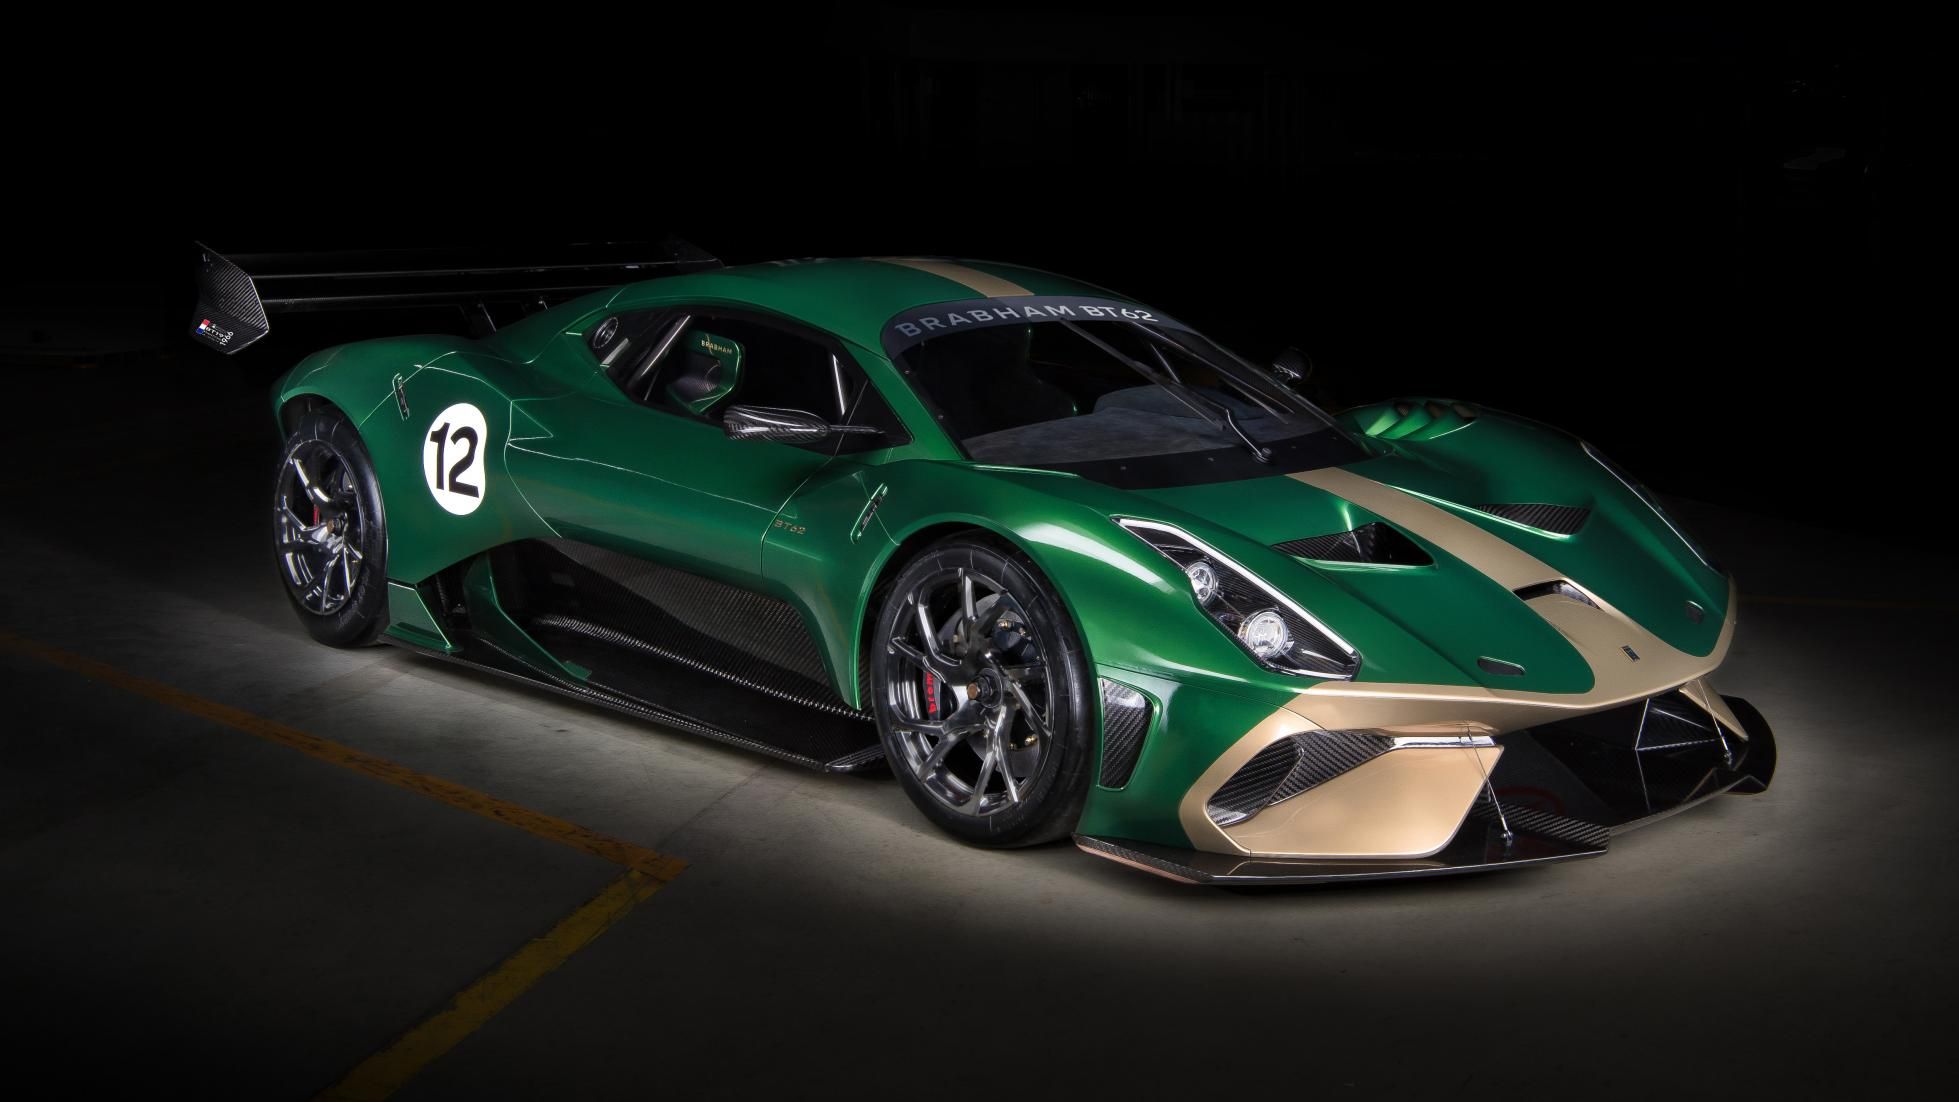 Brabham Partners With Goodyear; BT62 Set for Debut – Sportscar365